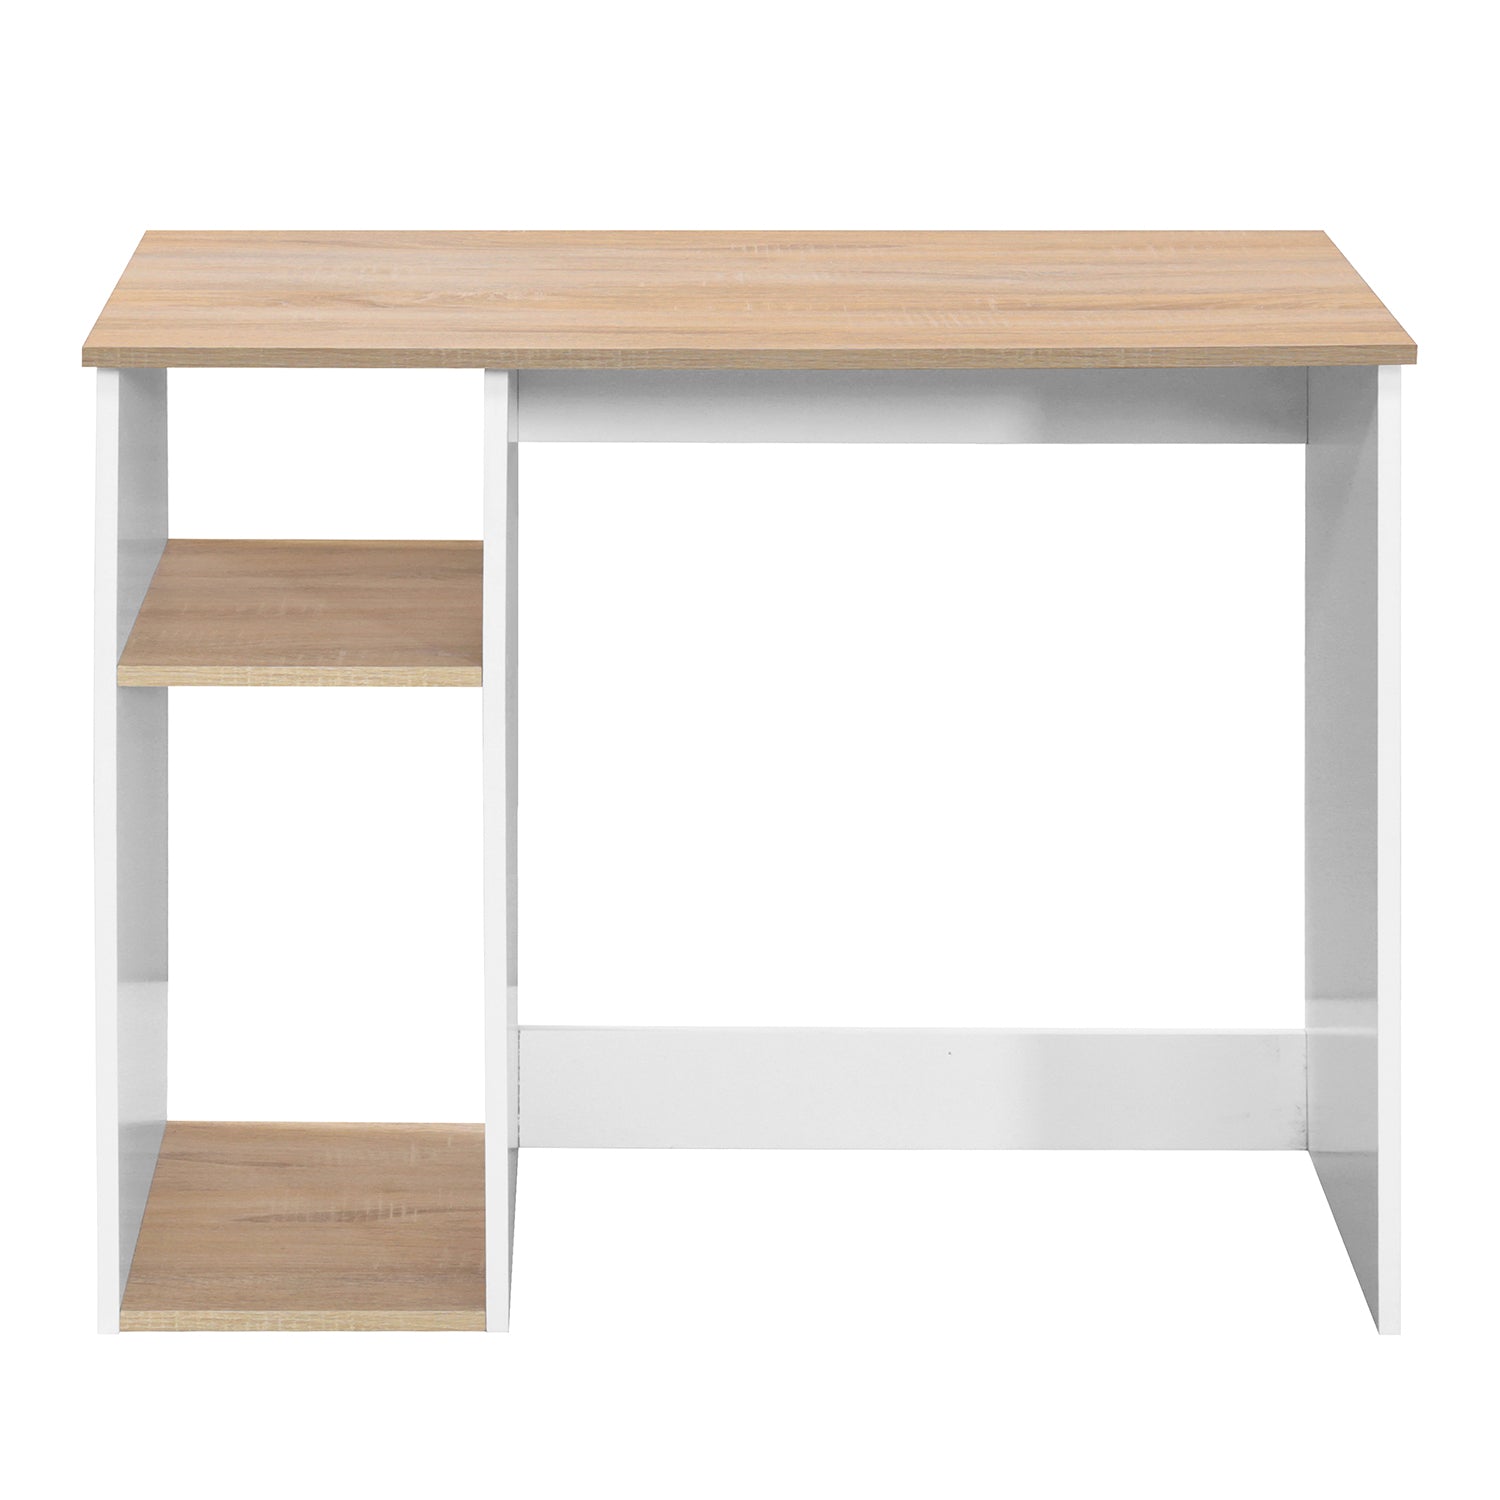 Modern Geo Oak and White Computer Table With Storage Shelves